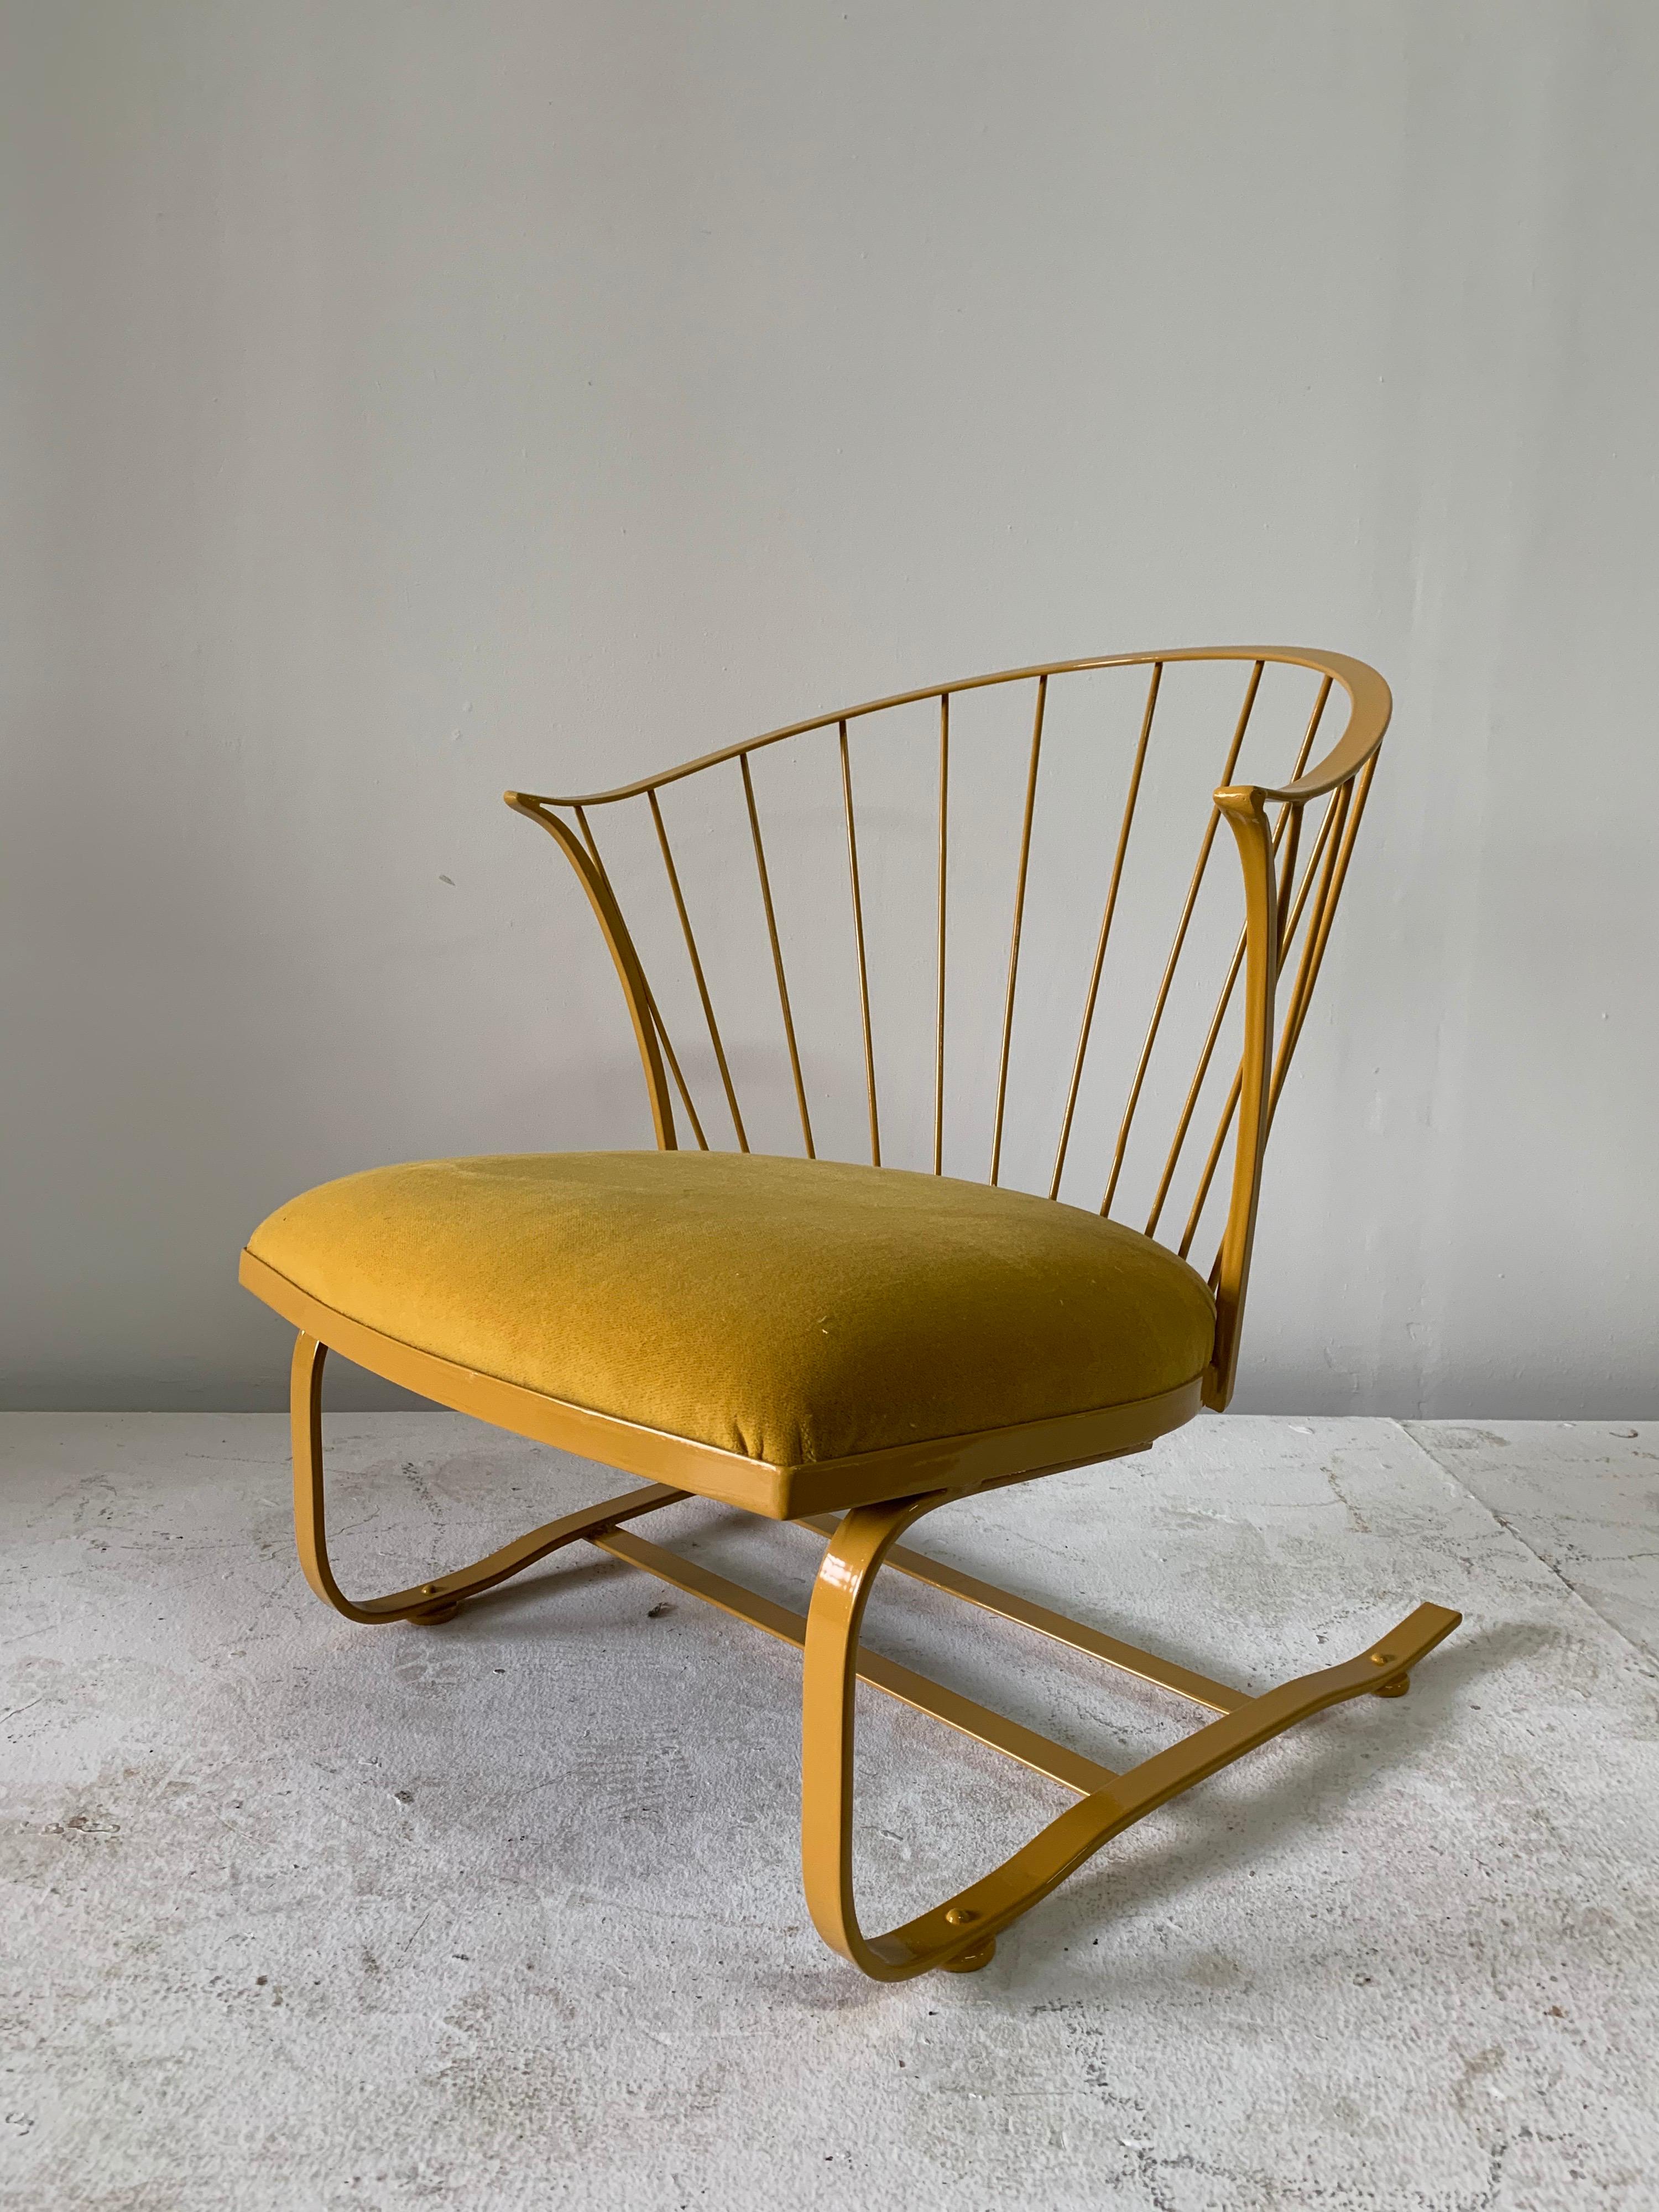 Rare vintage Russell Woodard custom powder-coated chair that leans back in rocker style. This newly powder-coated iron Woodard chair in “Cat yellow” and finely upholstered in matching cotton/mohair fabric. This has been upholstered for interior use.